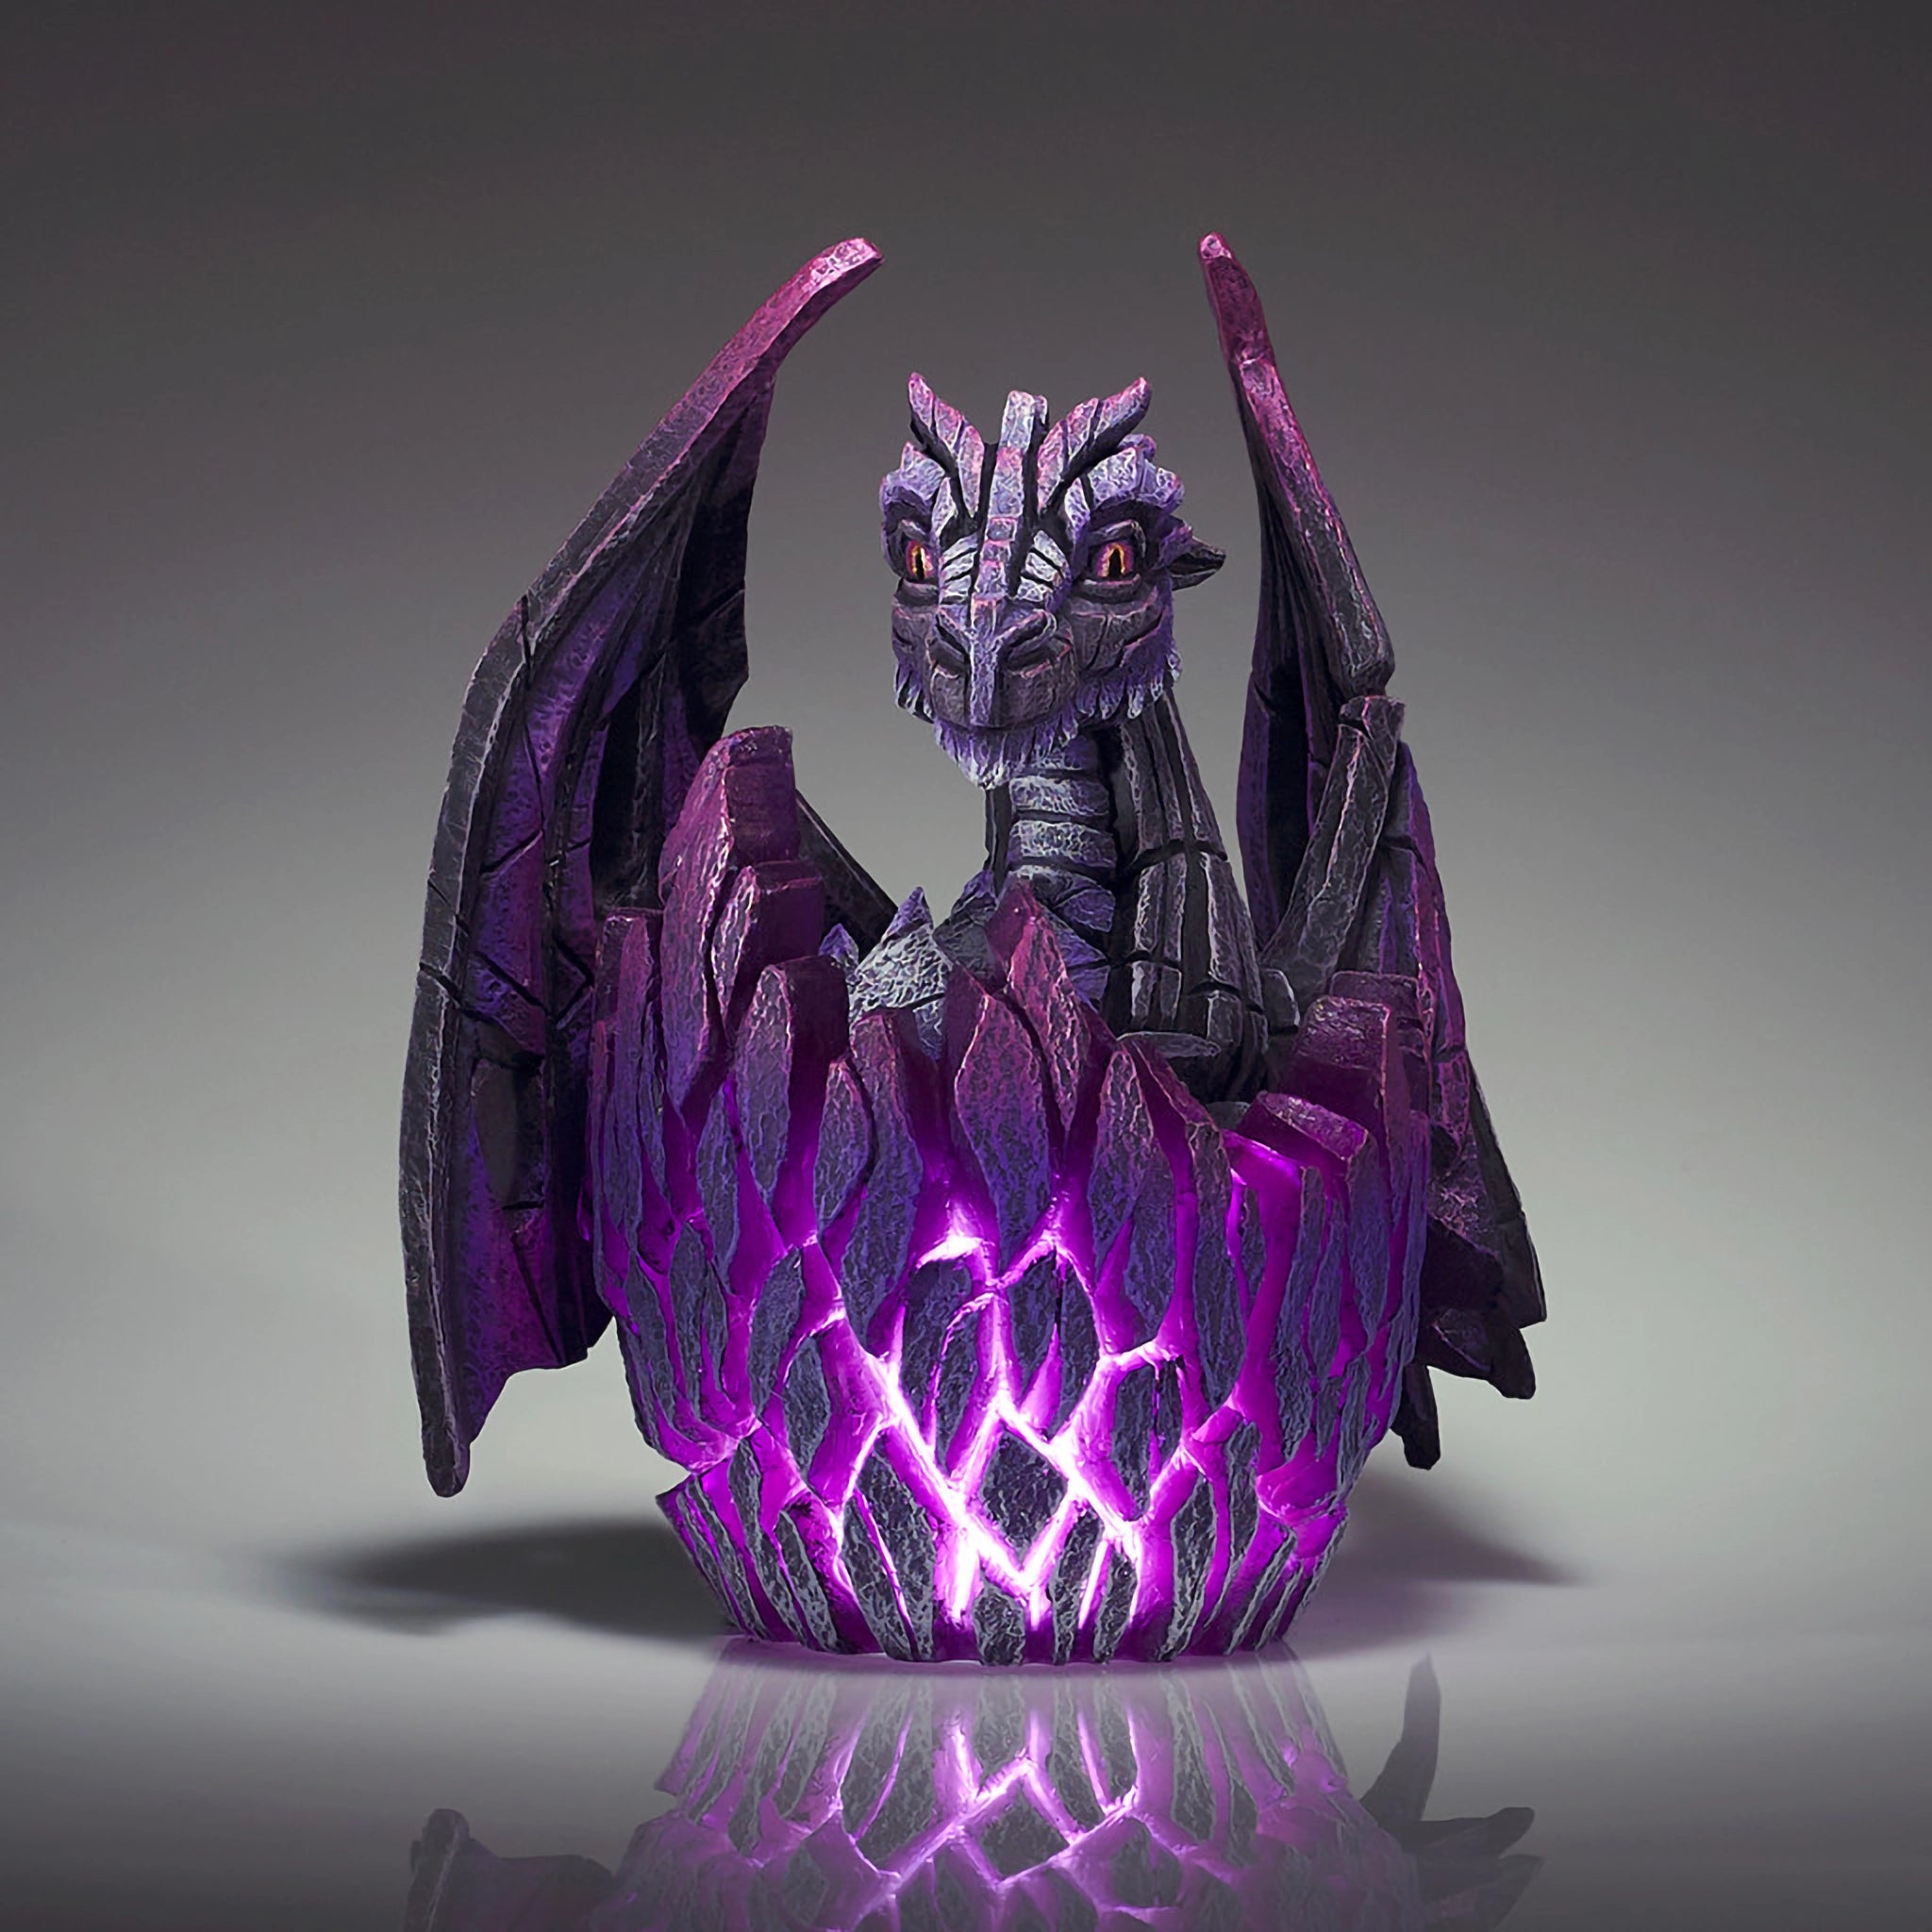 Front view of a modern sculpture of a black baby dragon hatching from an egg that lights up in purple